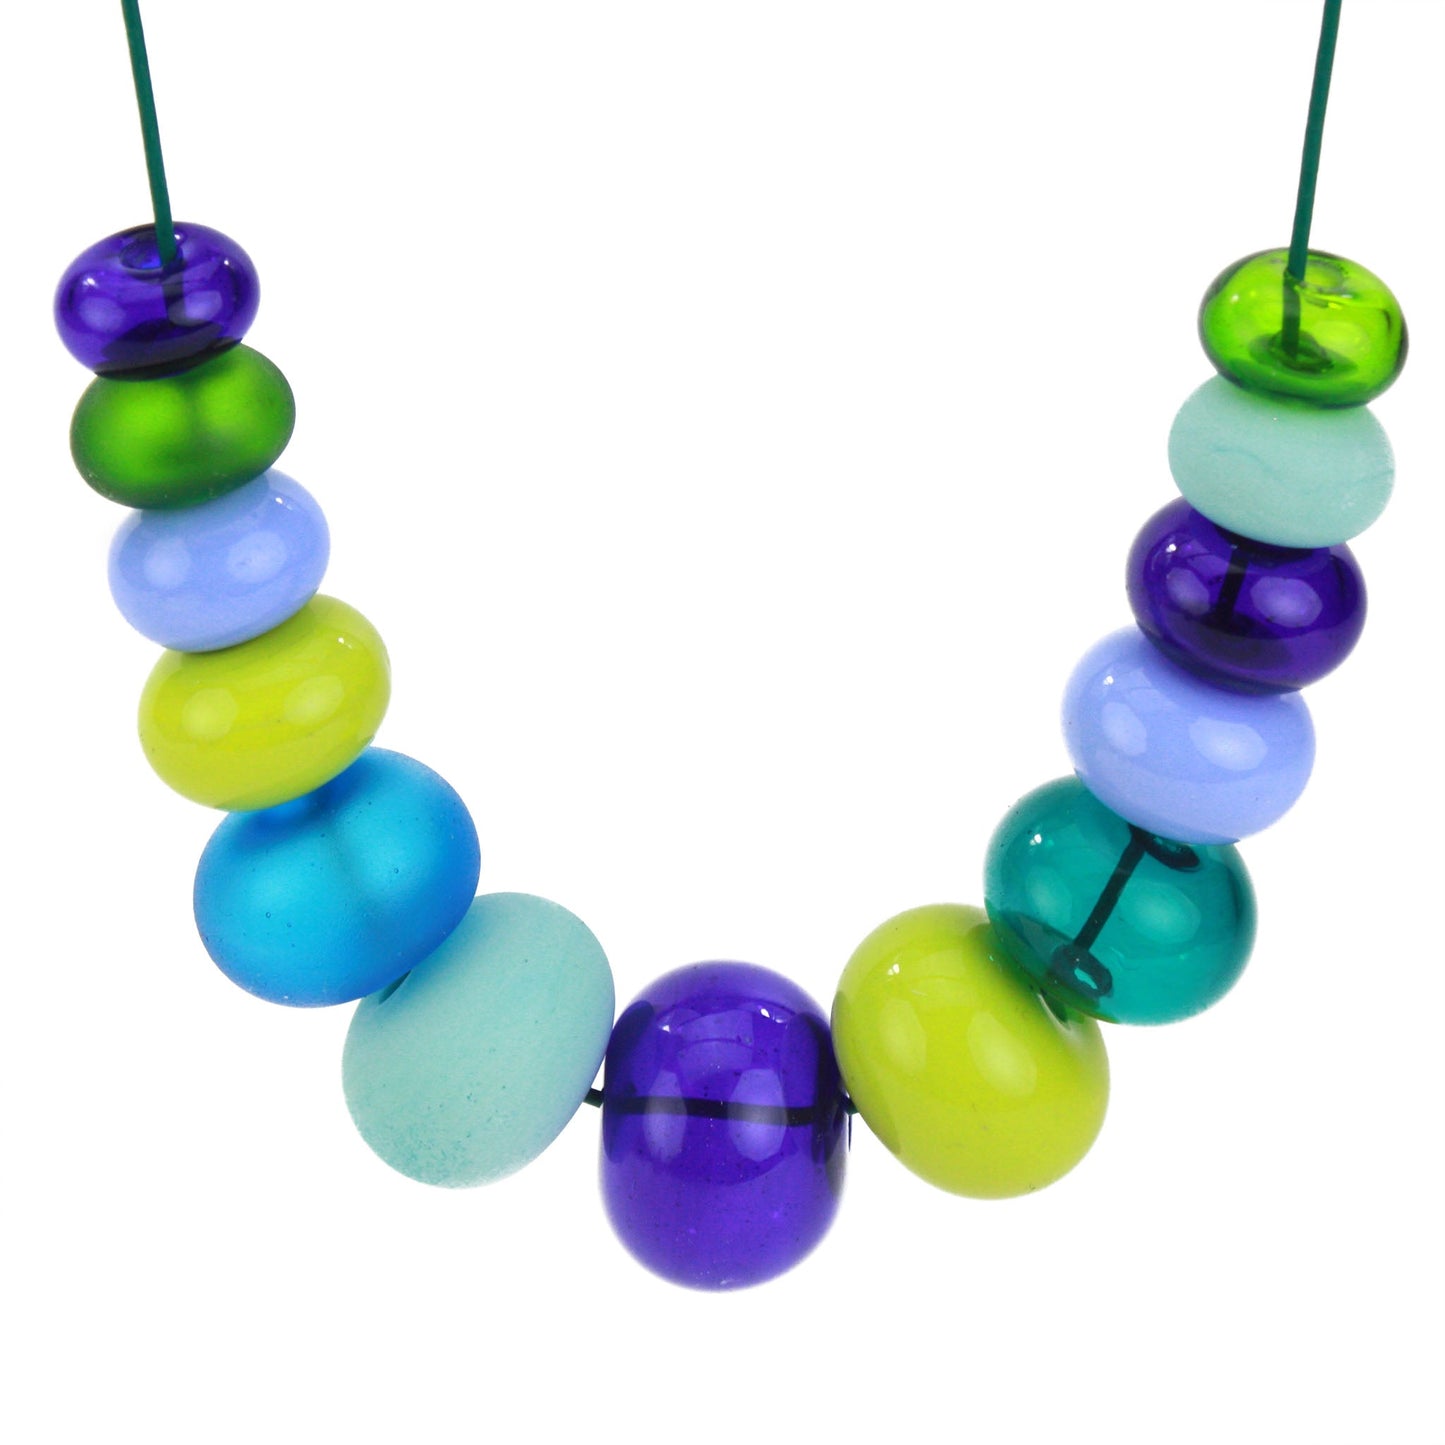 13 bead Bubble necklace - blues and greens